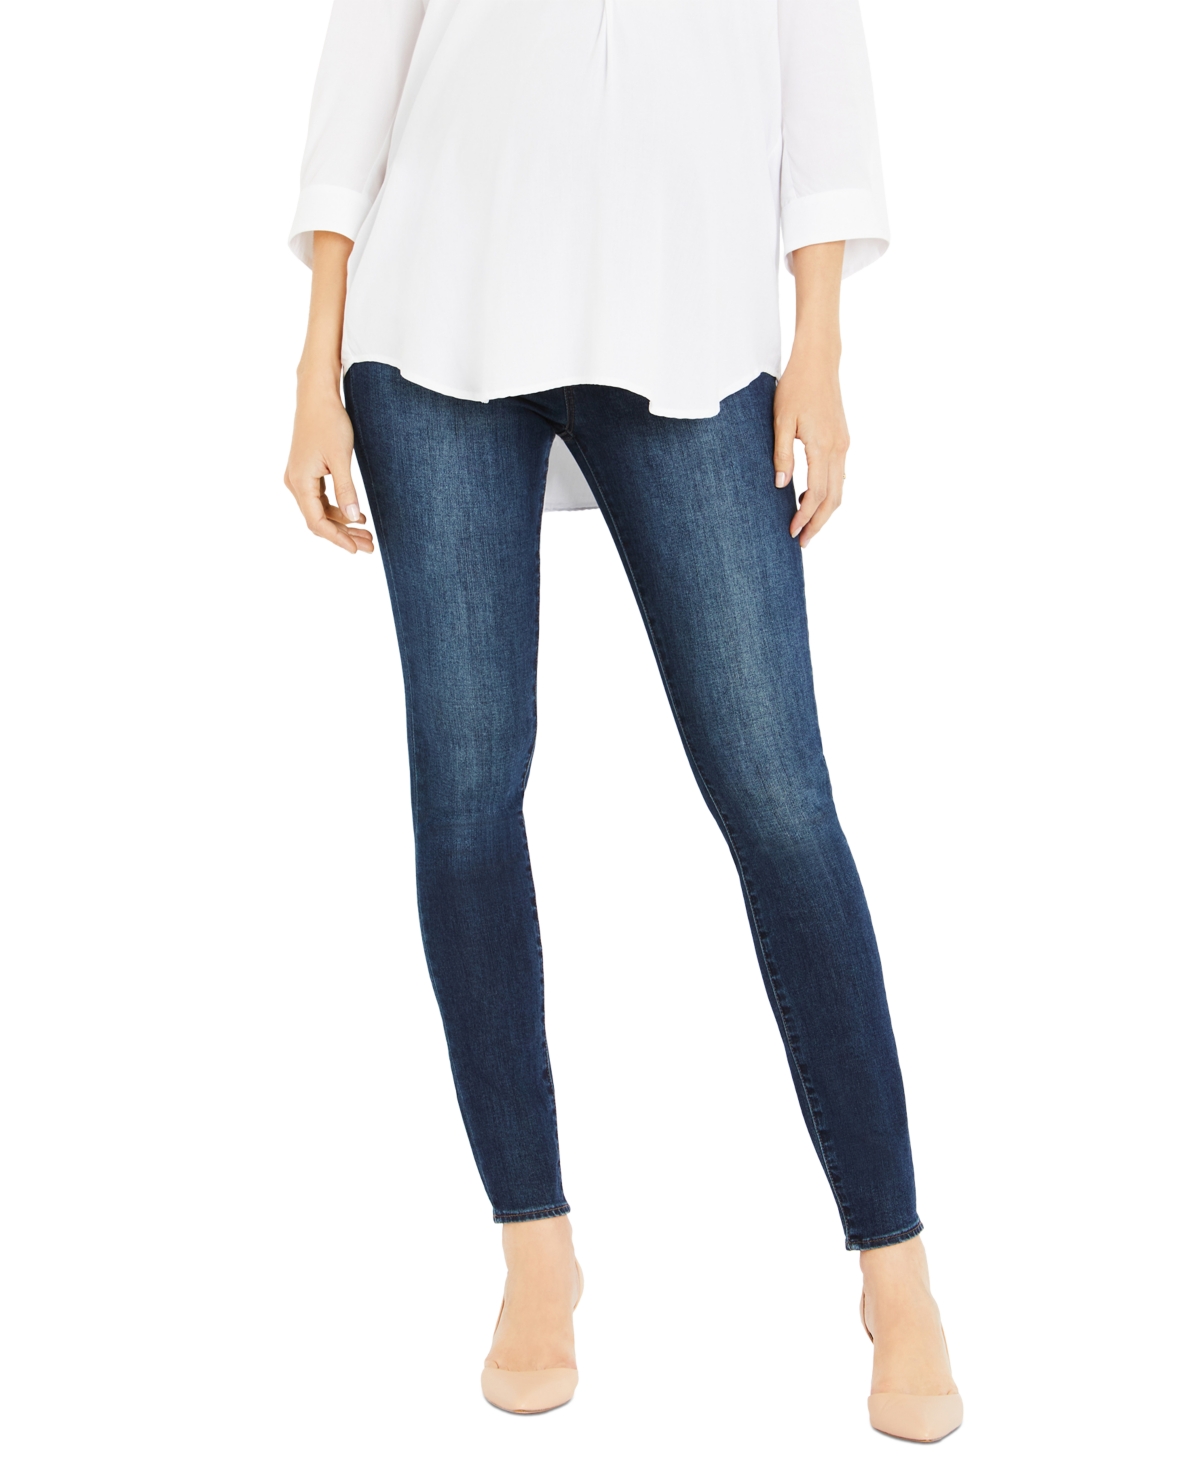  Articles of Society Maternity Skinny Jeans